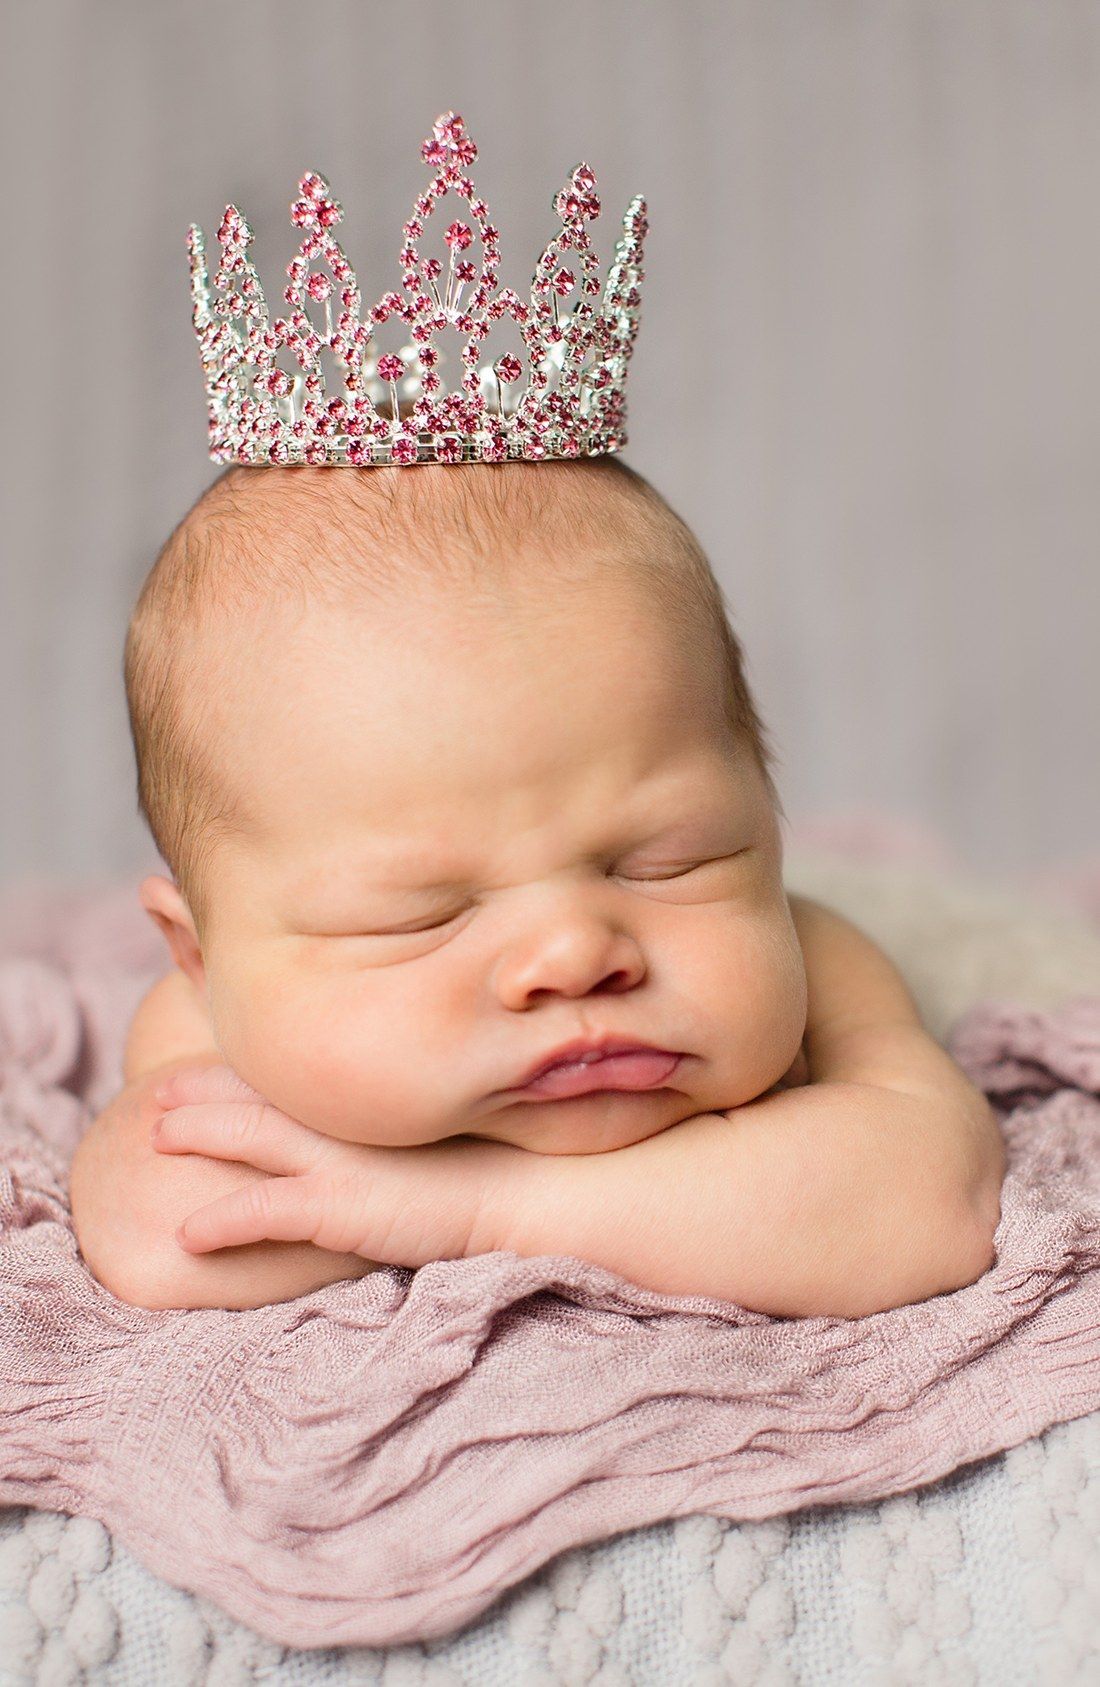 Adorable! Love this pink crown for a baby picture. The Swarovski crystals are so sparkly.